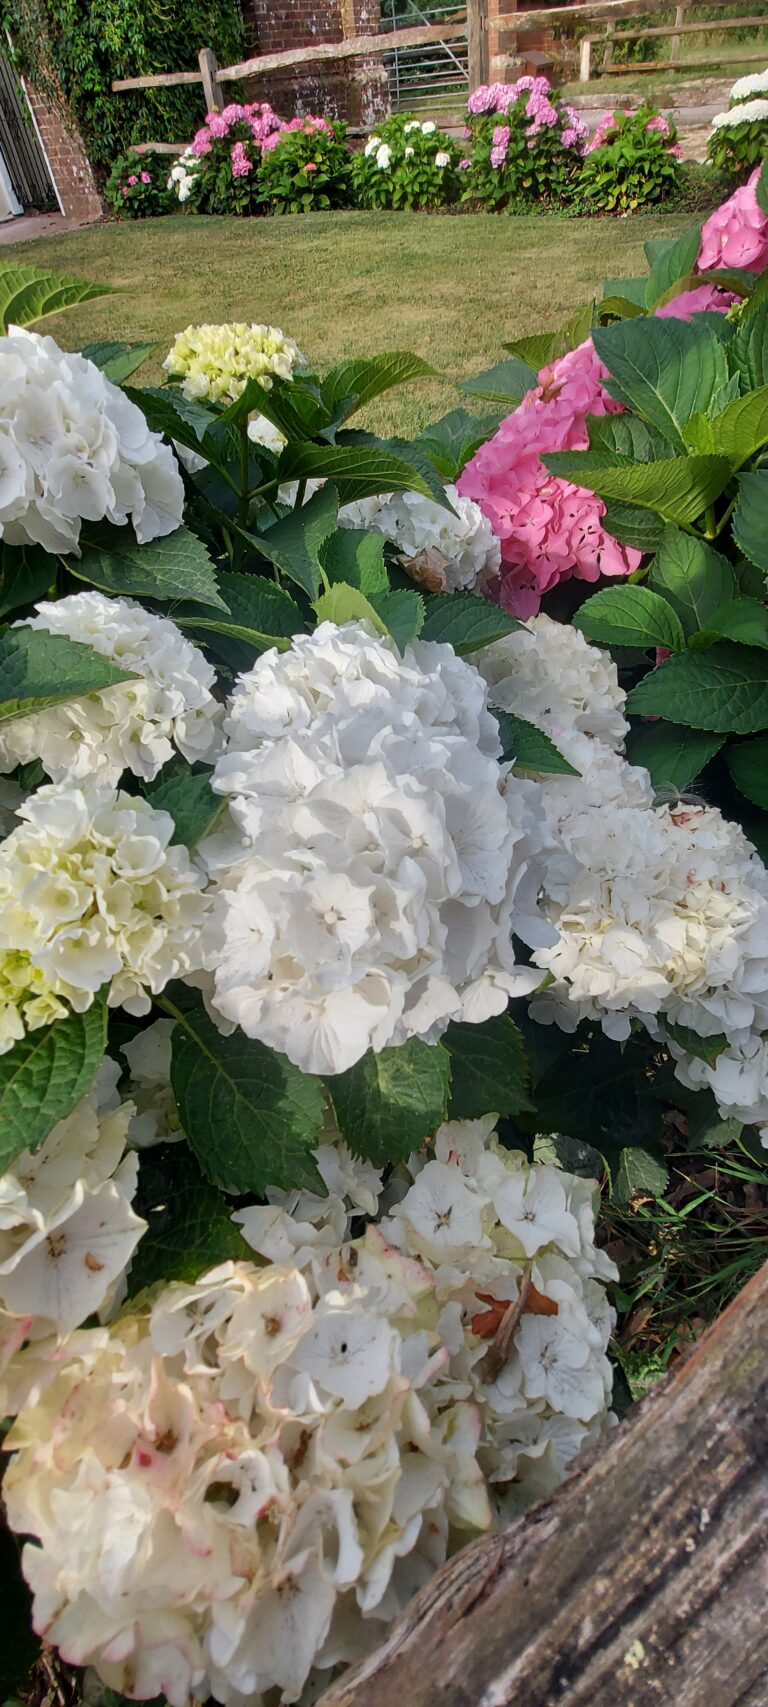 How long does Hydrangea live ?